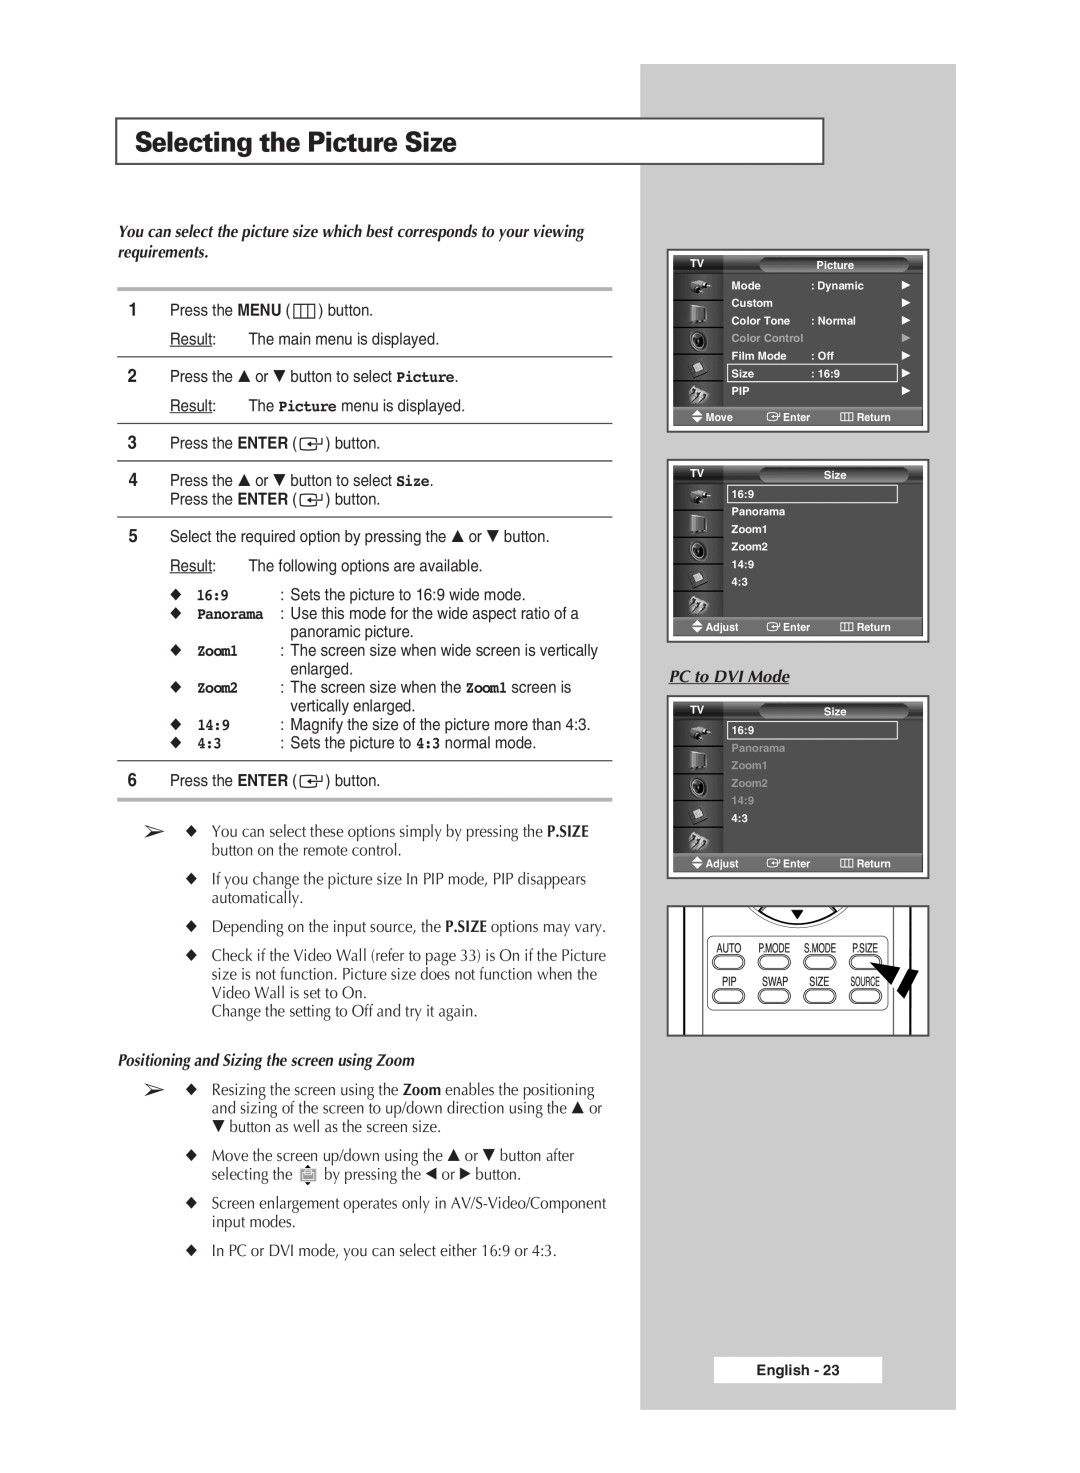 Samsung PPM63M5HSX/EDC manual Selecting the Picture Size, Positioning and Sizing the screen using Zoom, PC to DVI Mode 